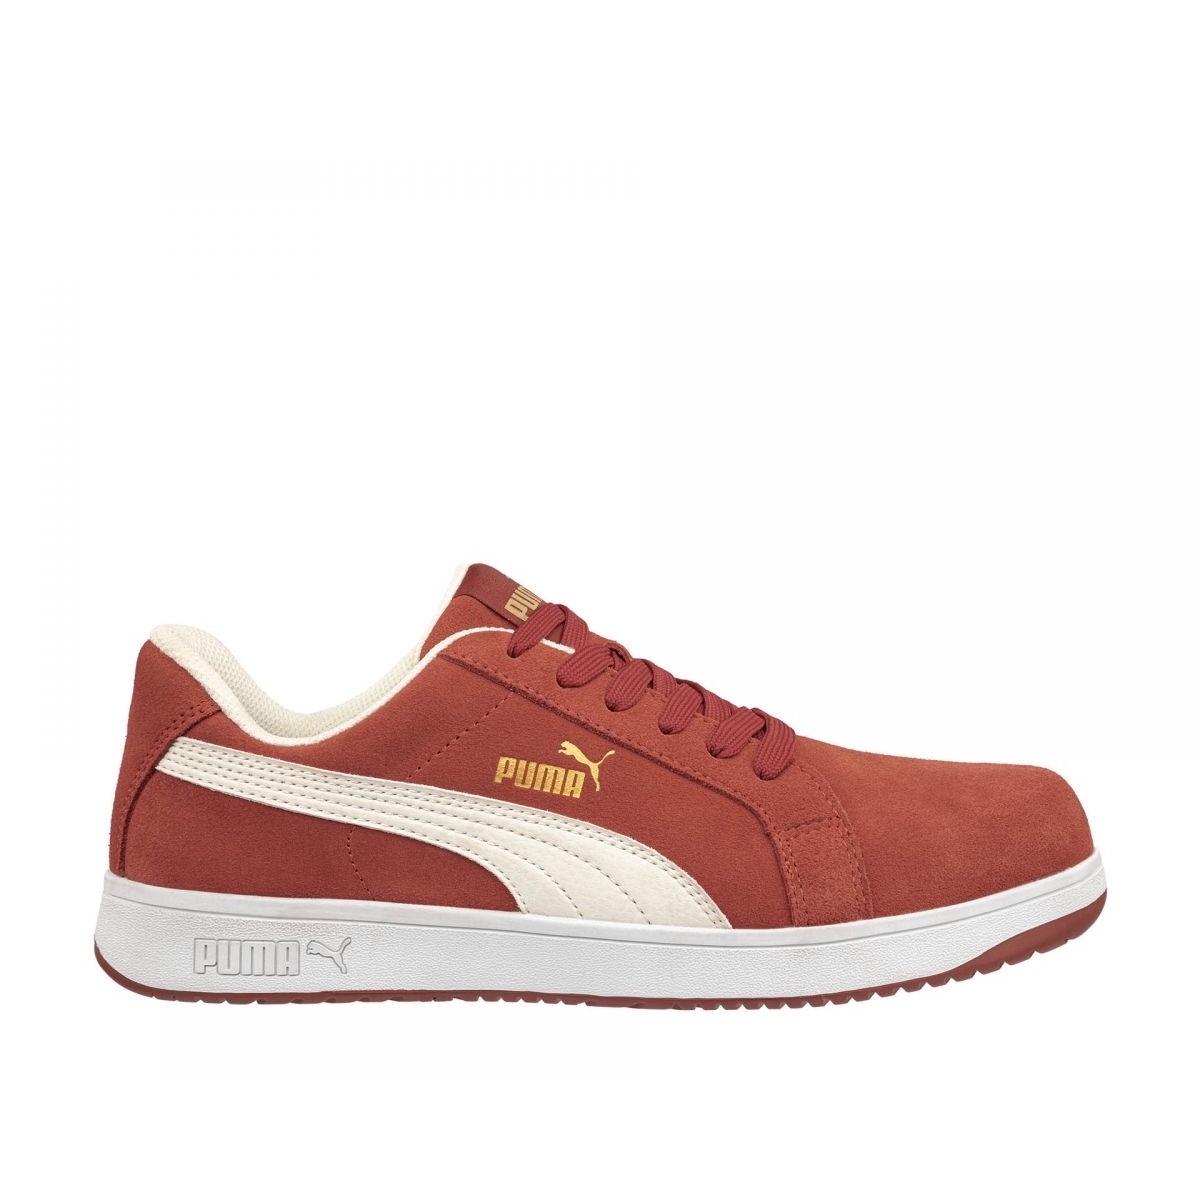 PUMA Safety Men's Iconic Low Composite Toe EH Work Shoes Red Suede - 640045 ONE SIZE RED - RED, 11.5